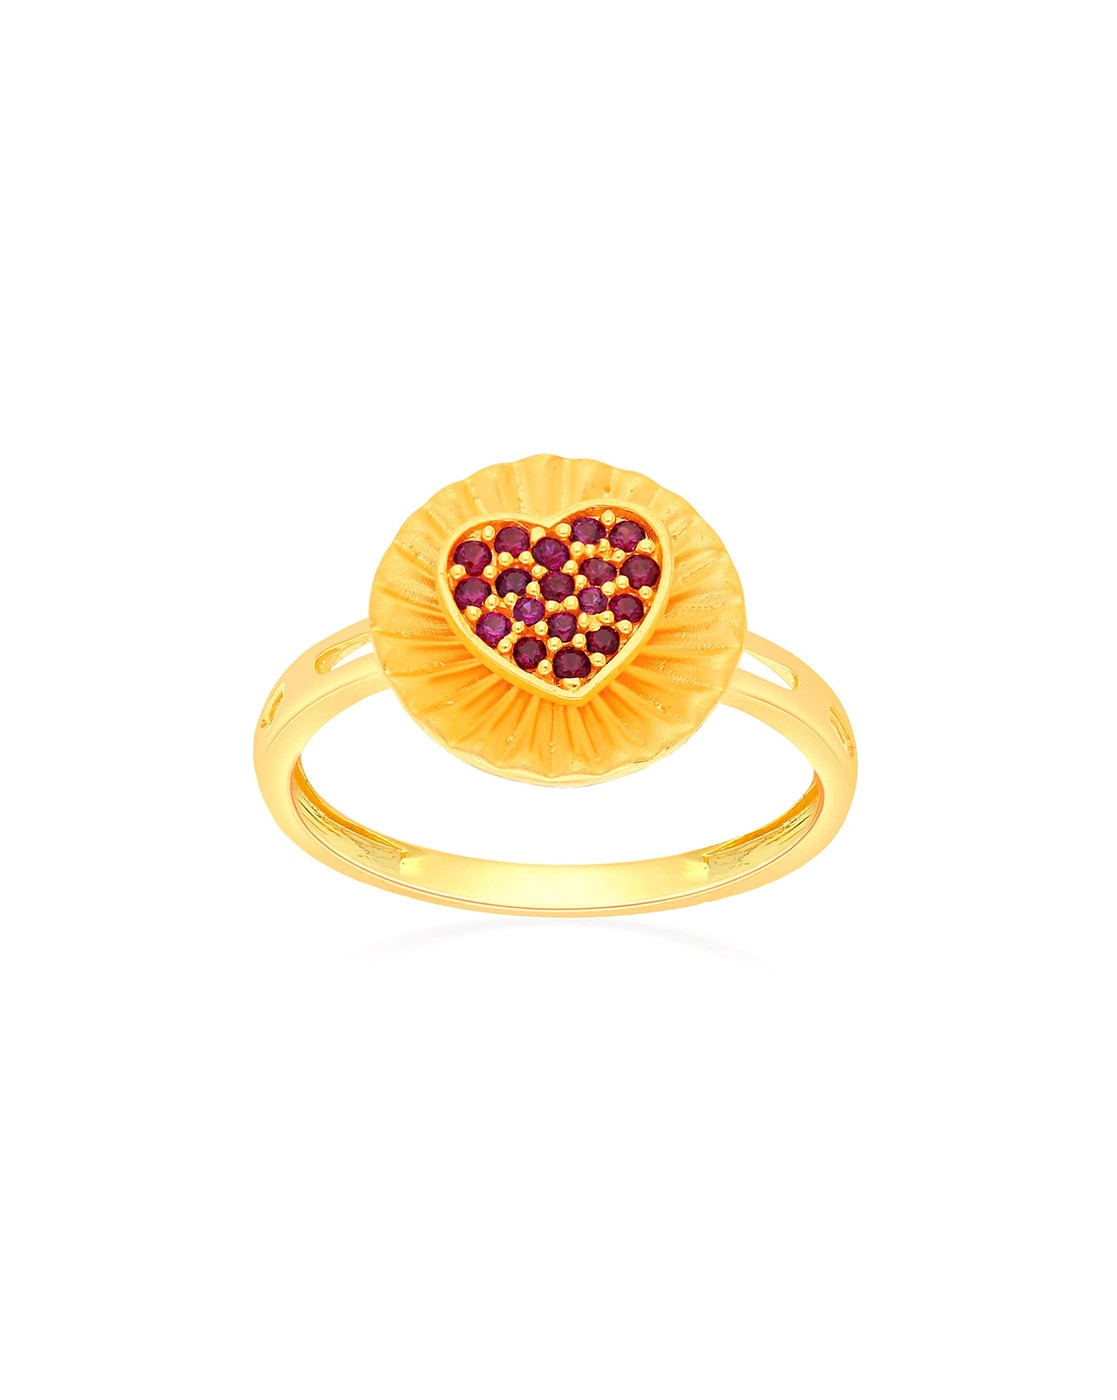 Malabar Gold Cocktail Ring From 2.54Gm/Rs.21K Designs With Price| Latest Gold  Ring Designs 2023 - YouTube